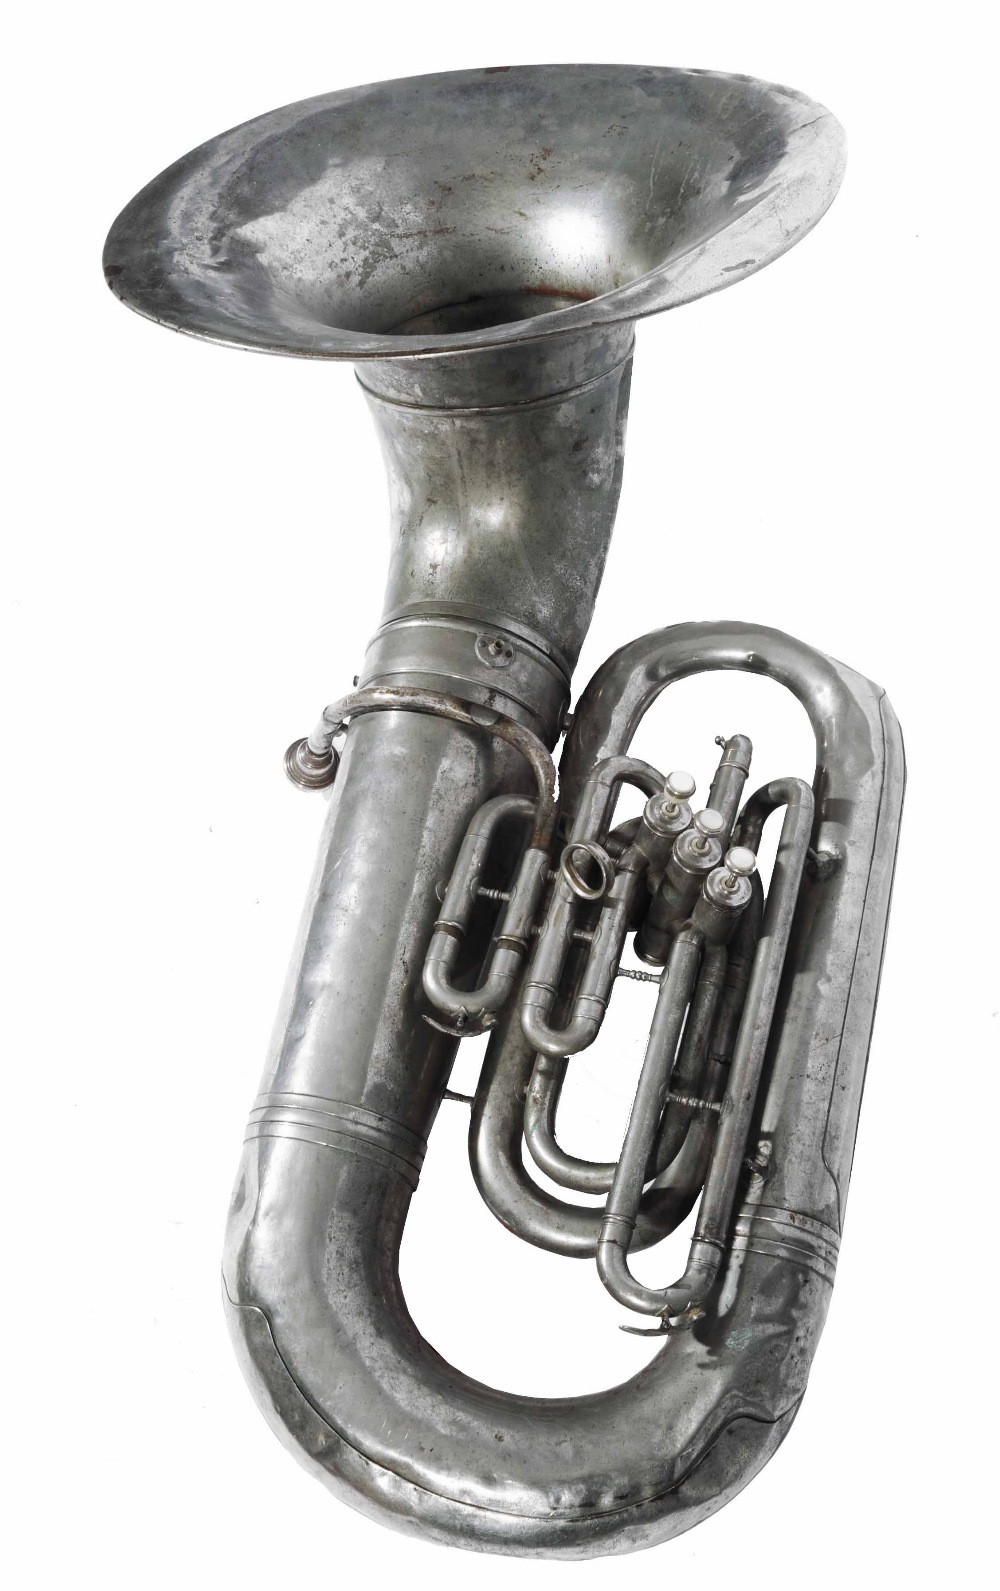 A C.G. CONN LTD ELKHEART-IND USA SOUSAPHONE TUBA in silvered brass, the 53cm bell with engraved